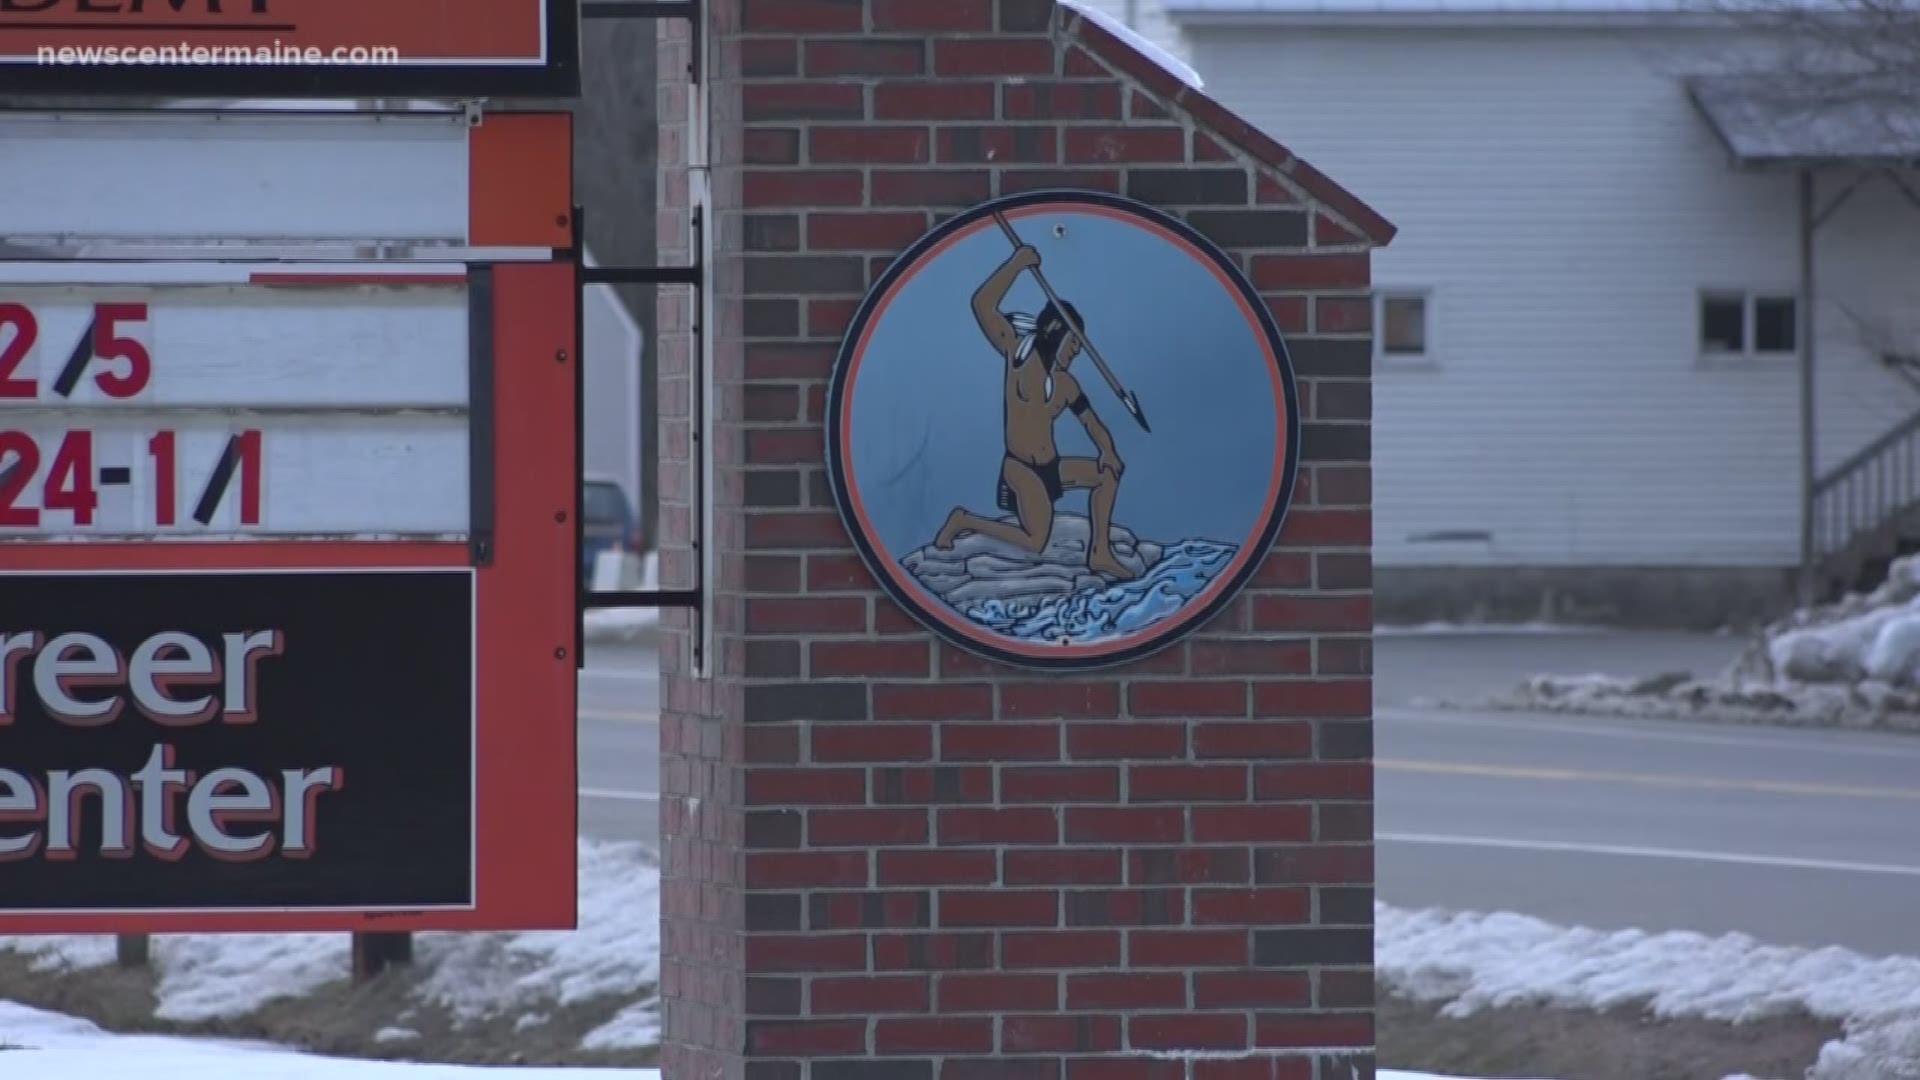 The Maine Senate passed a bill on Tuesday to ban public schools from using Native American mascots.